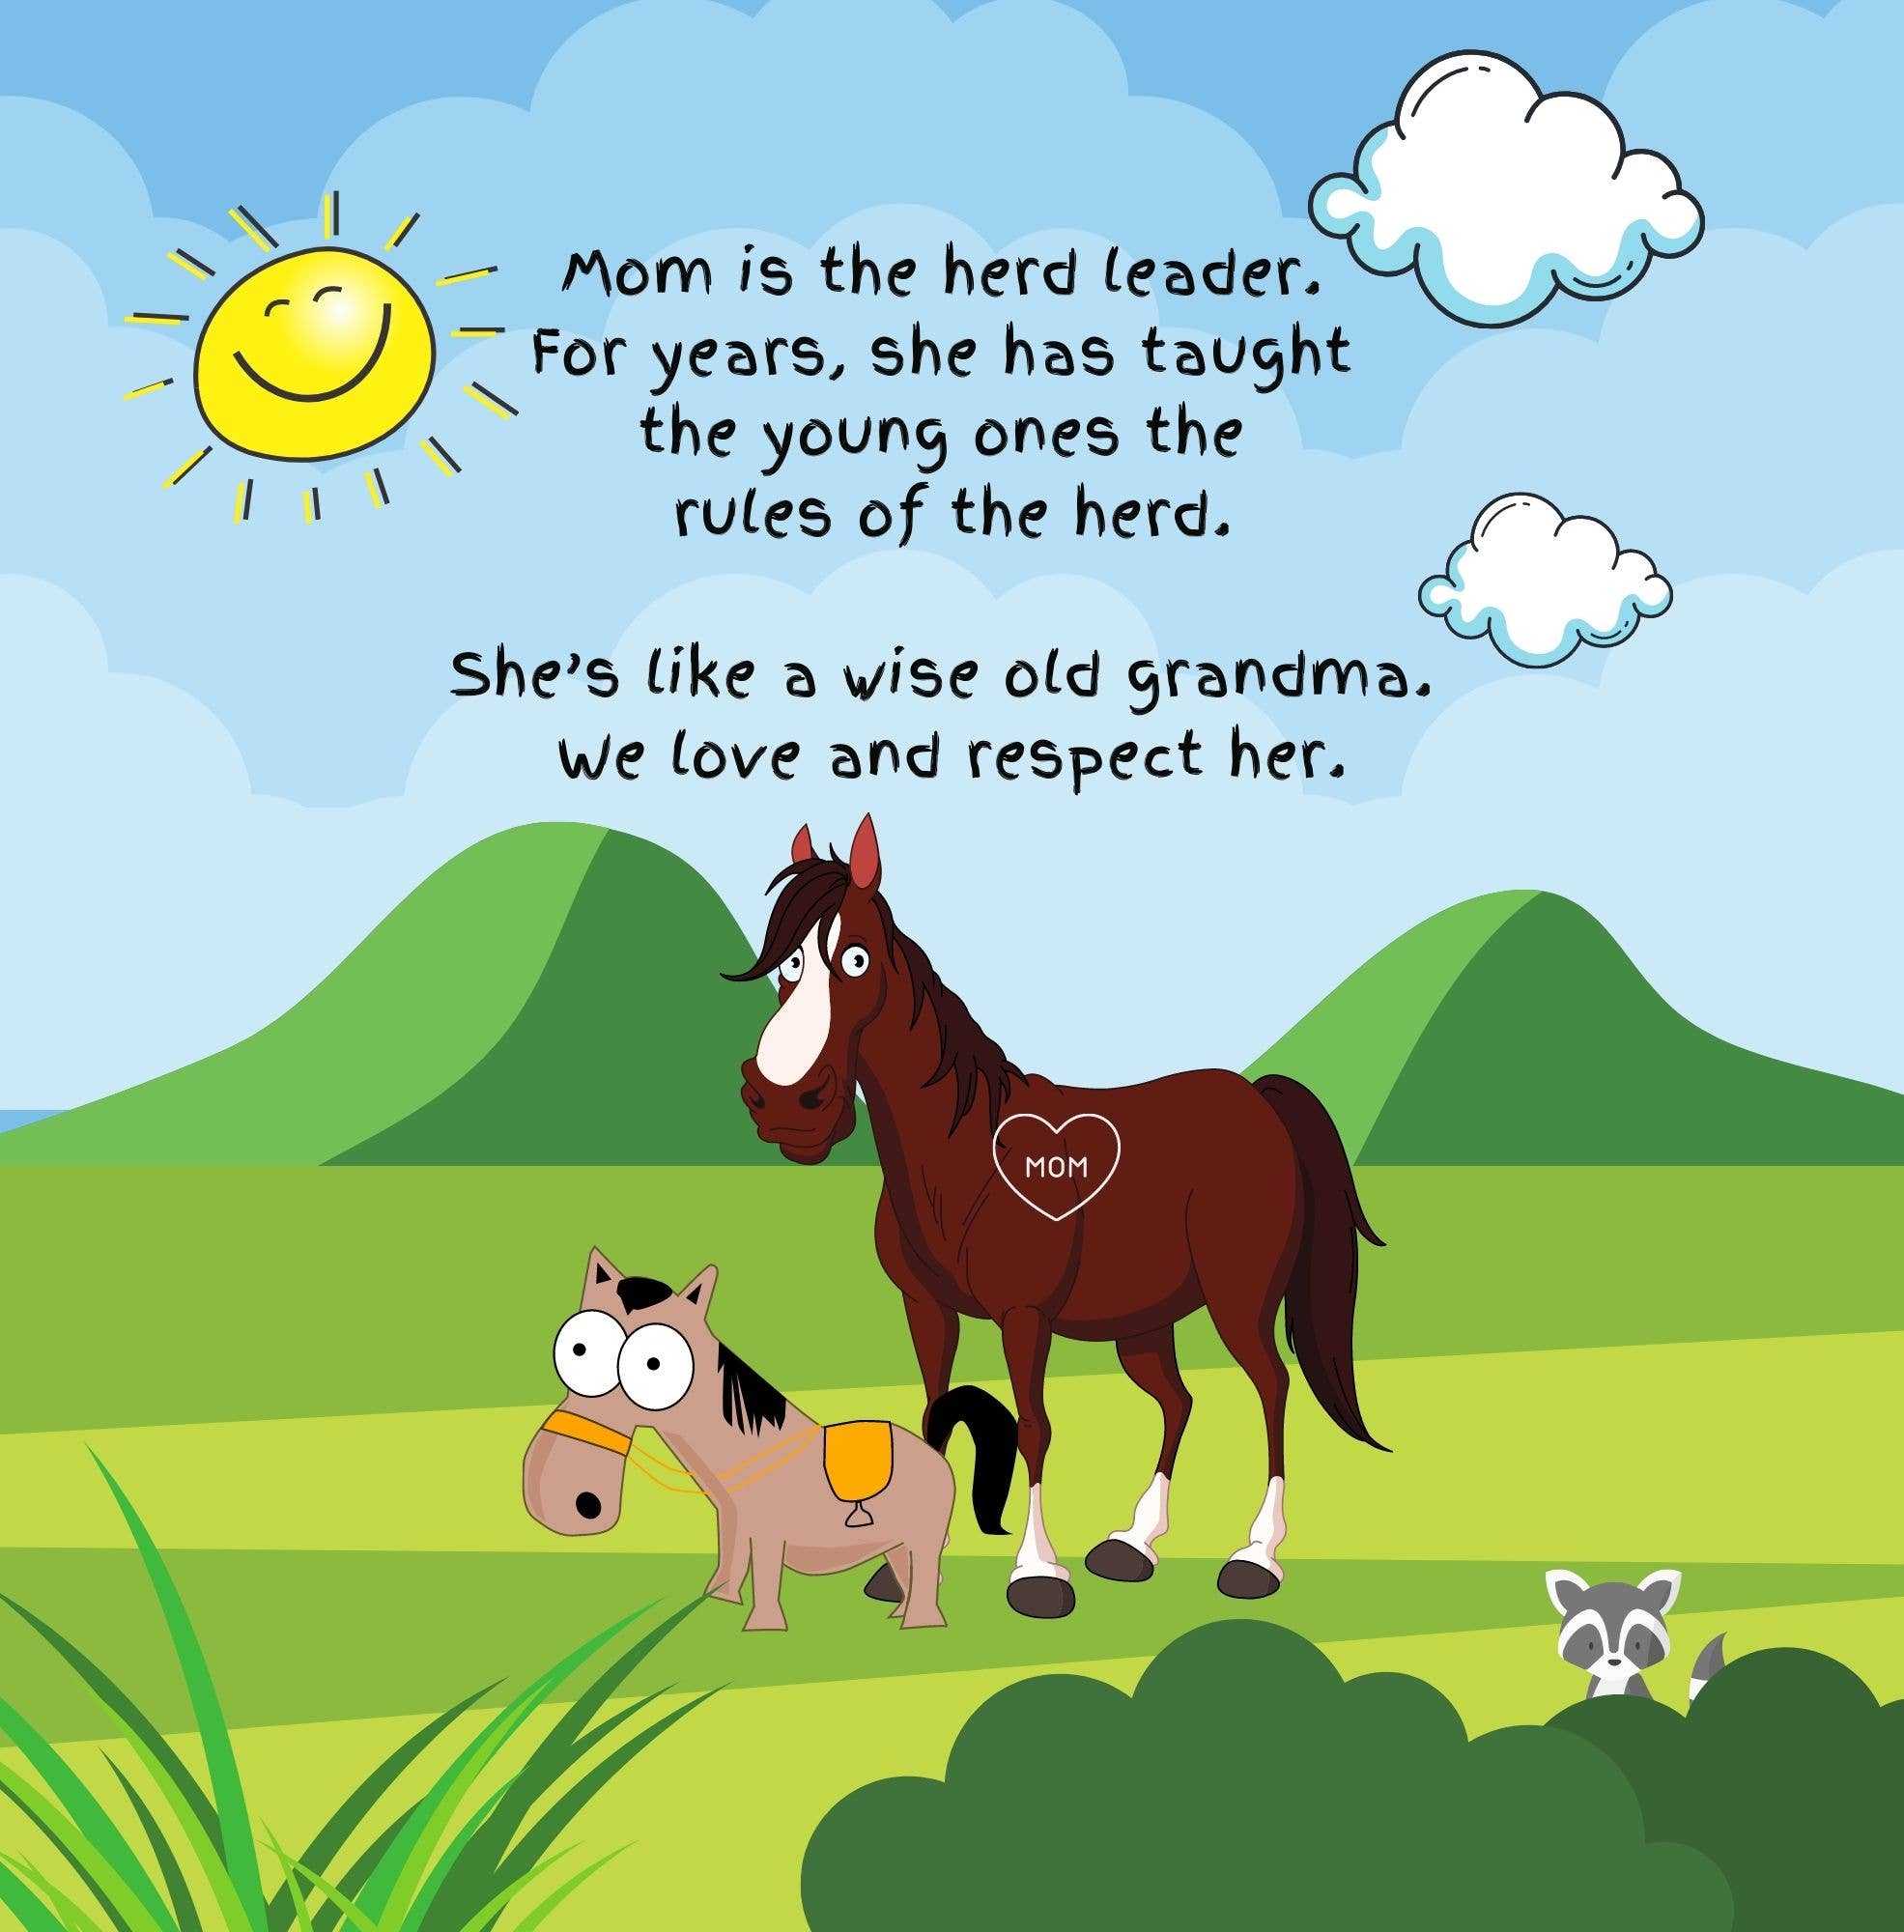 Lessons From Pete the Pony, Meet the Herd